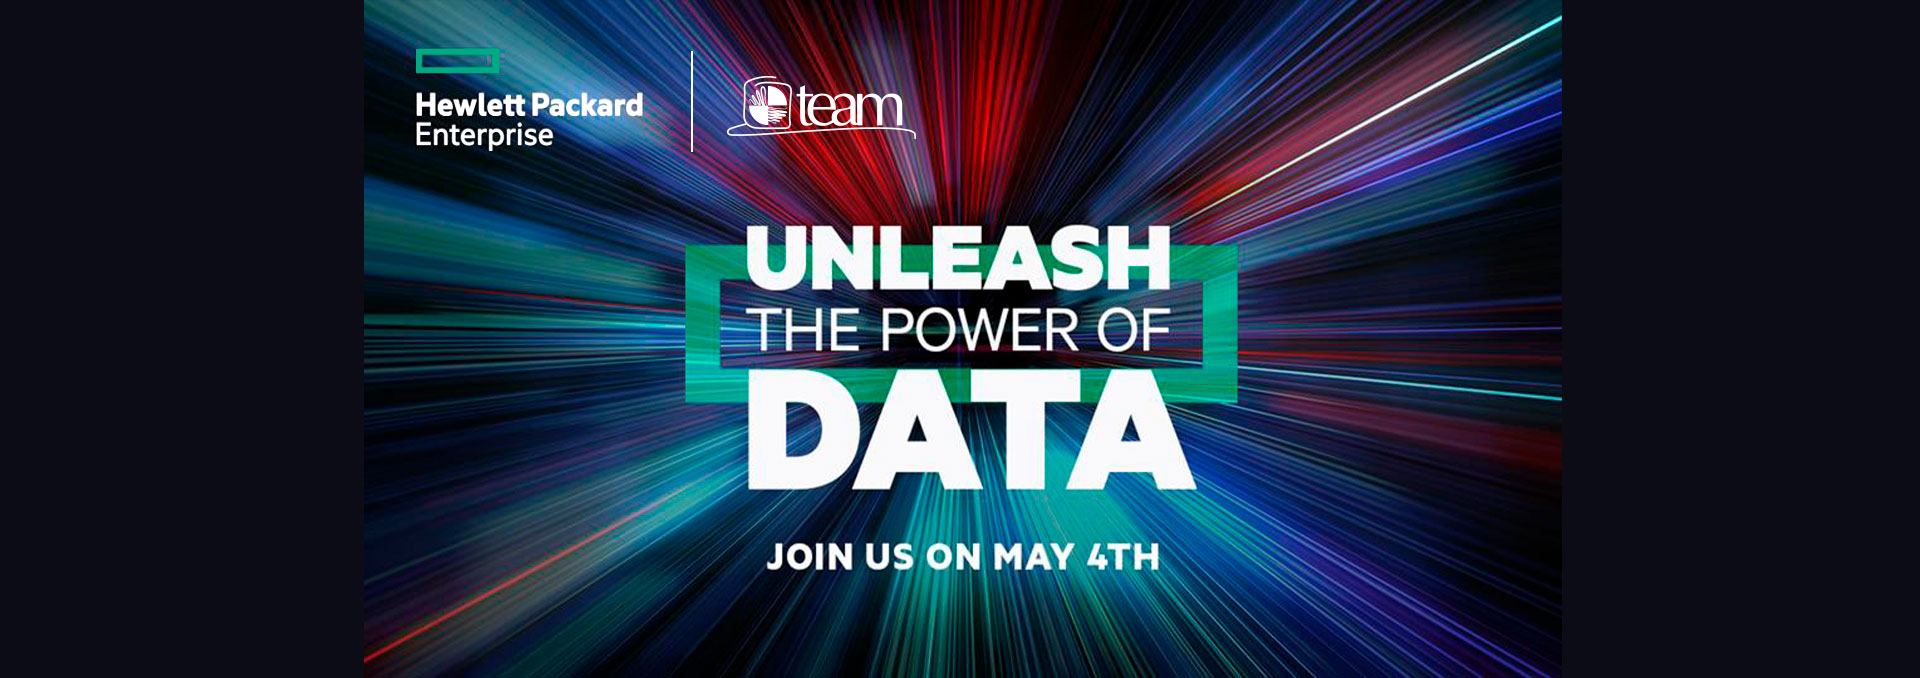 HPE Unleash the power of data